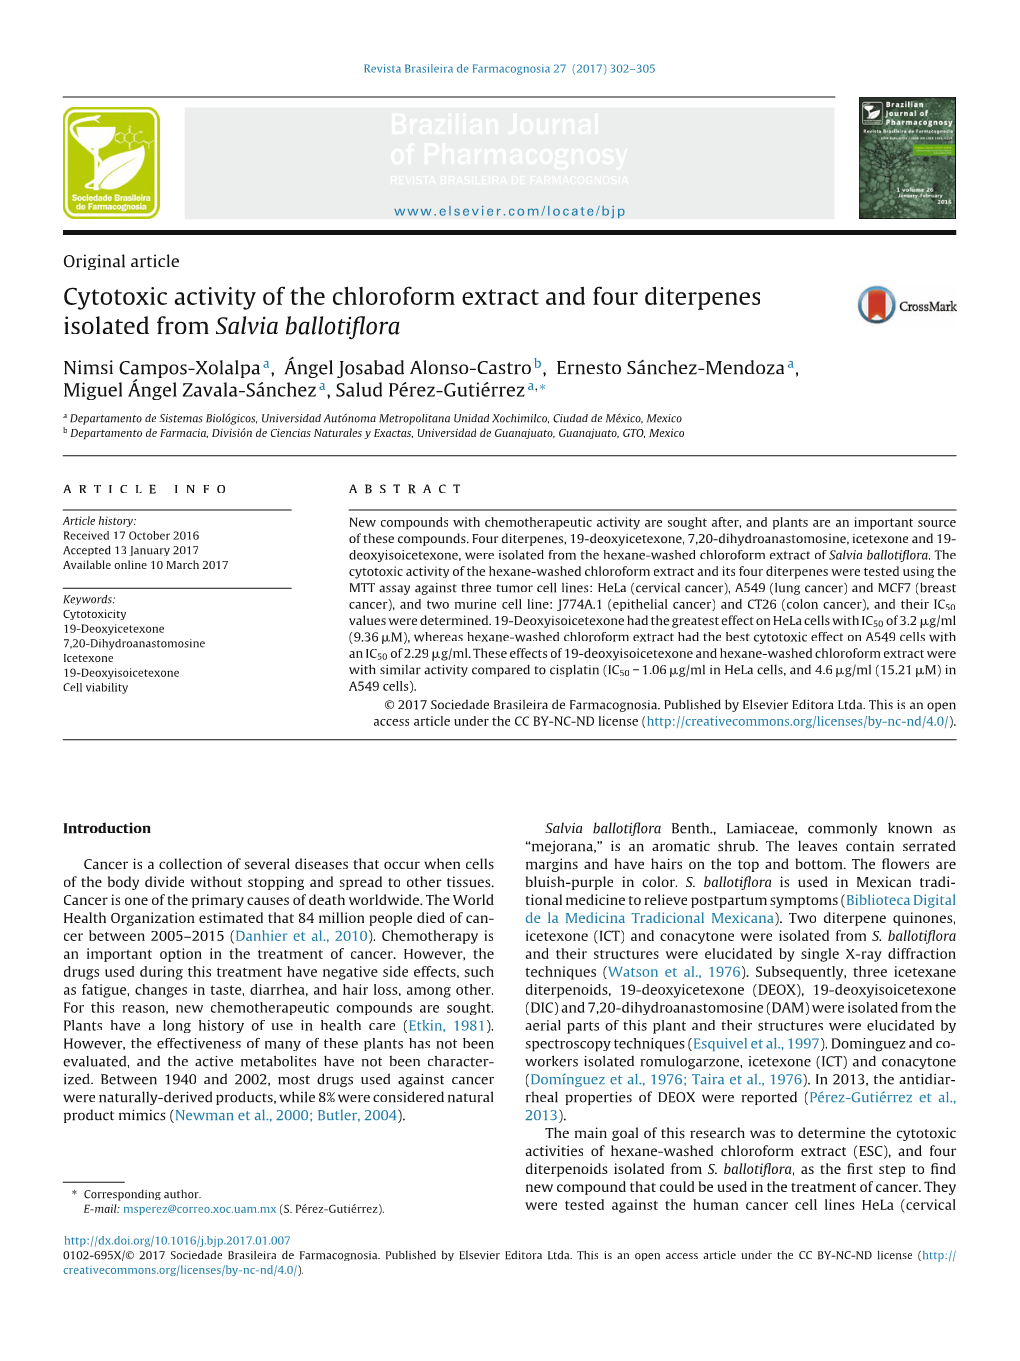 Cytotoxic Activity of the Chloroform Extract and Four Diterpenes Isolated